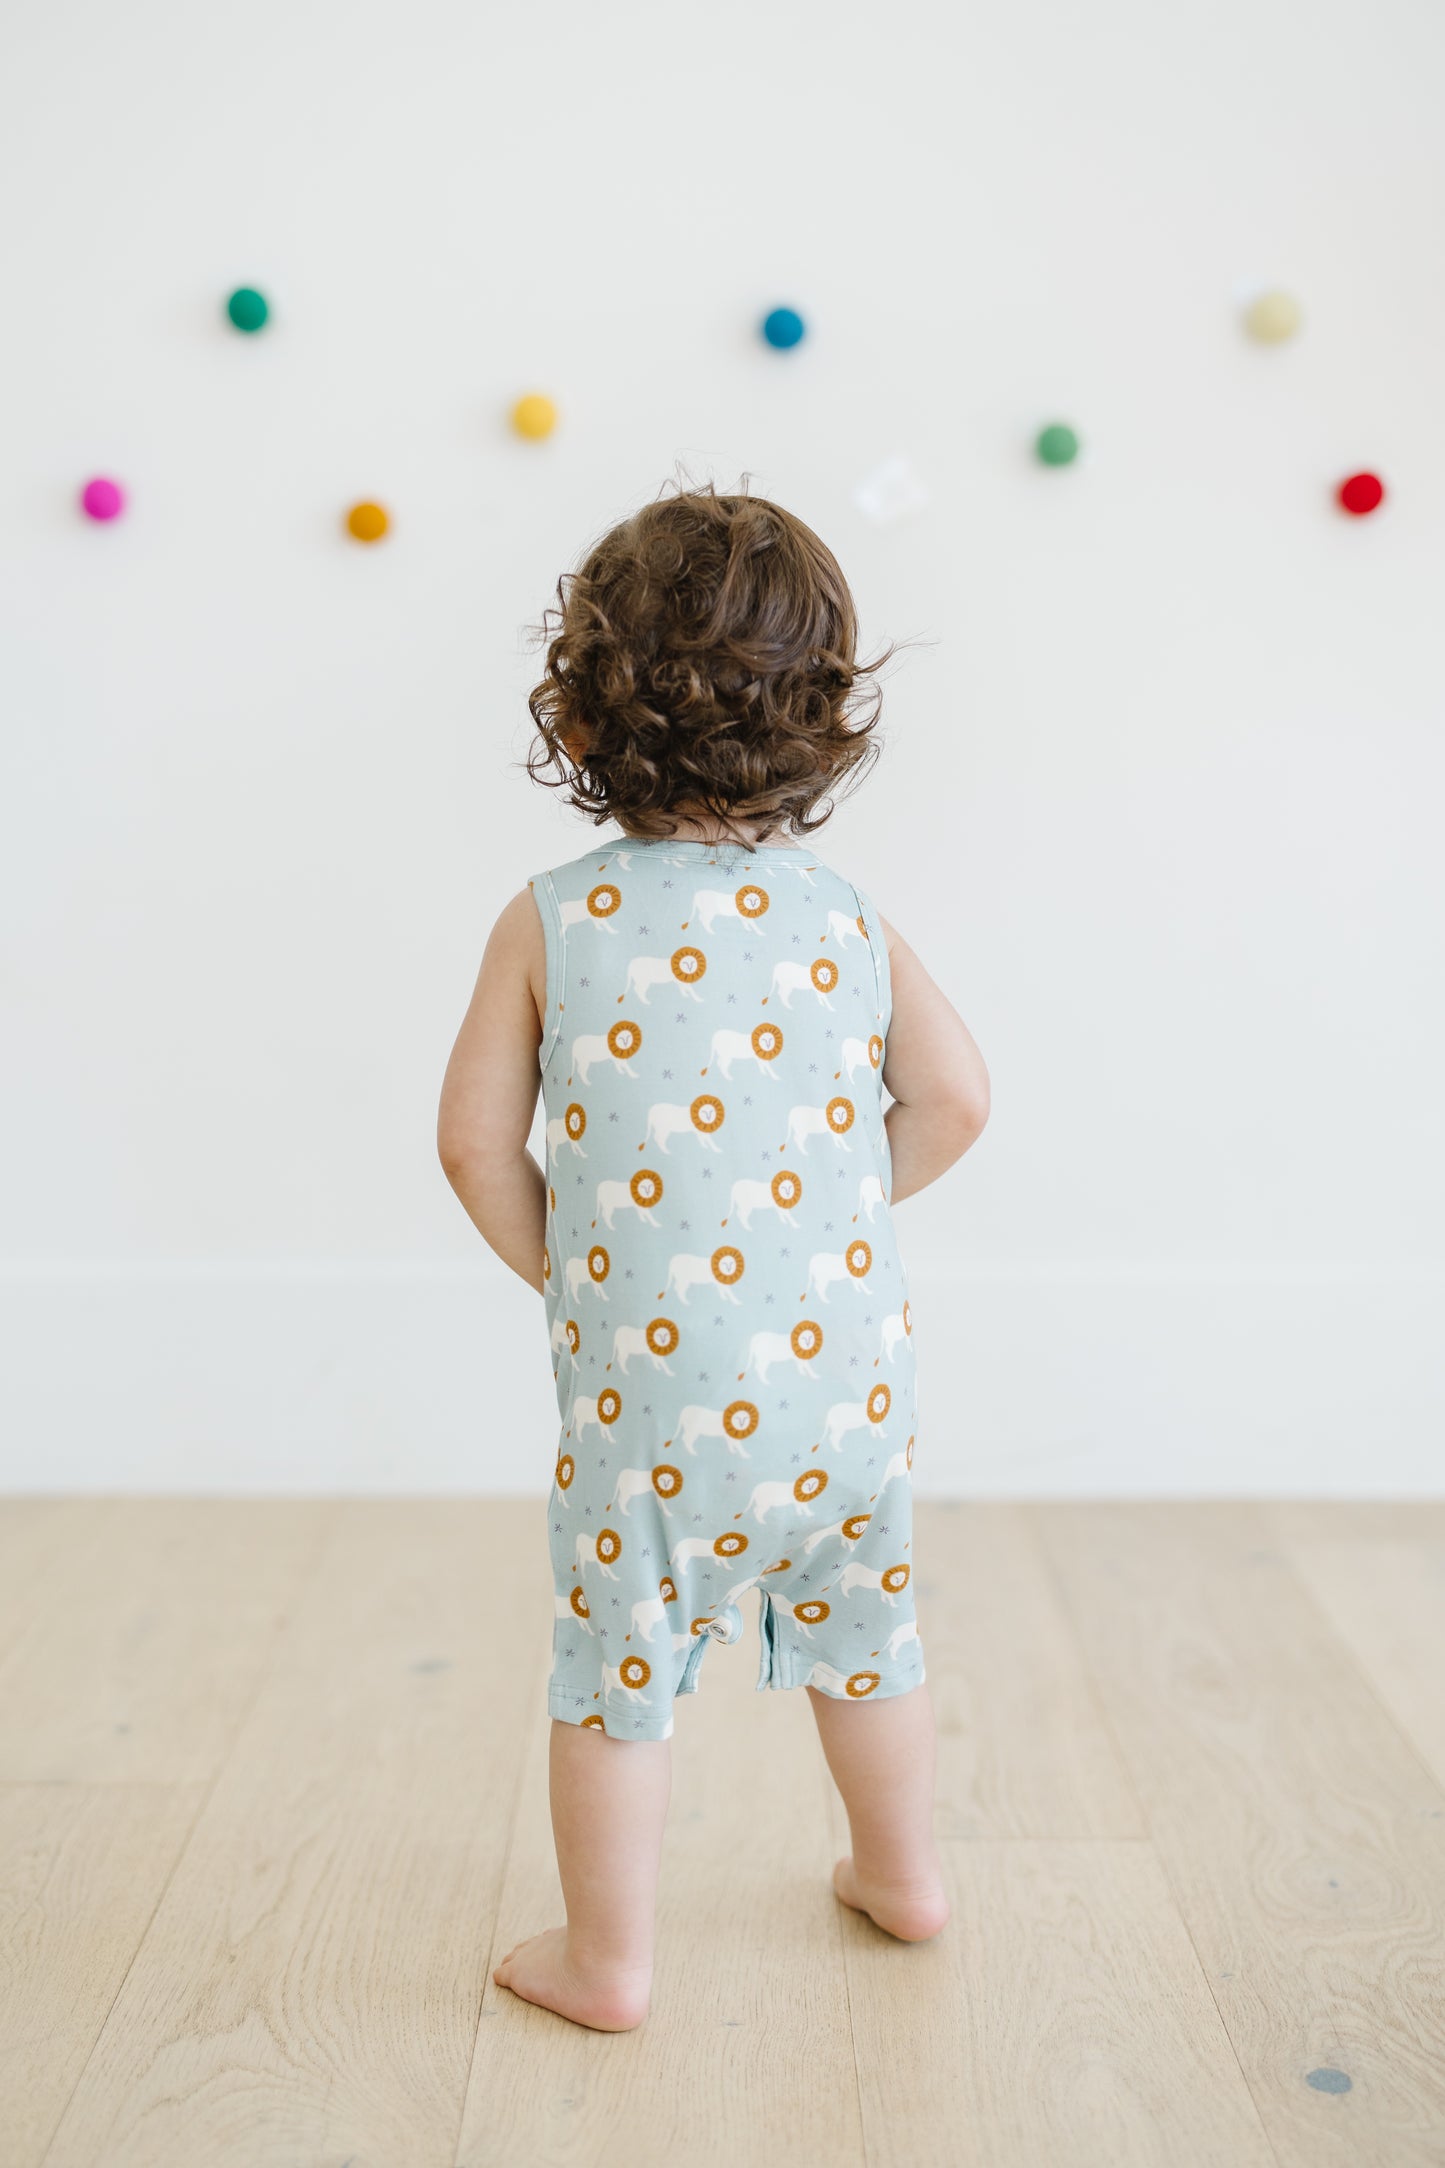 You're my Mane Squeeze - Lion Short Tank Romper